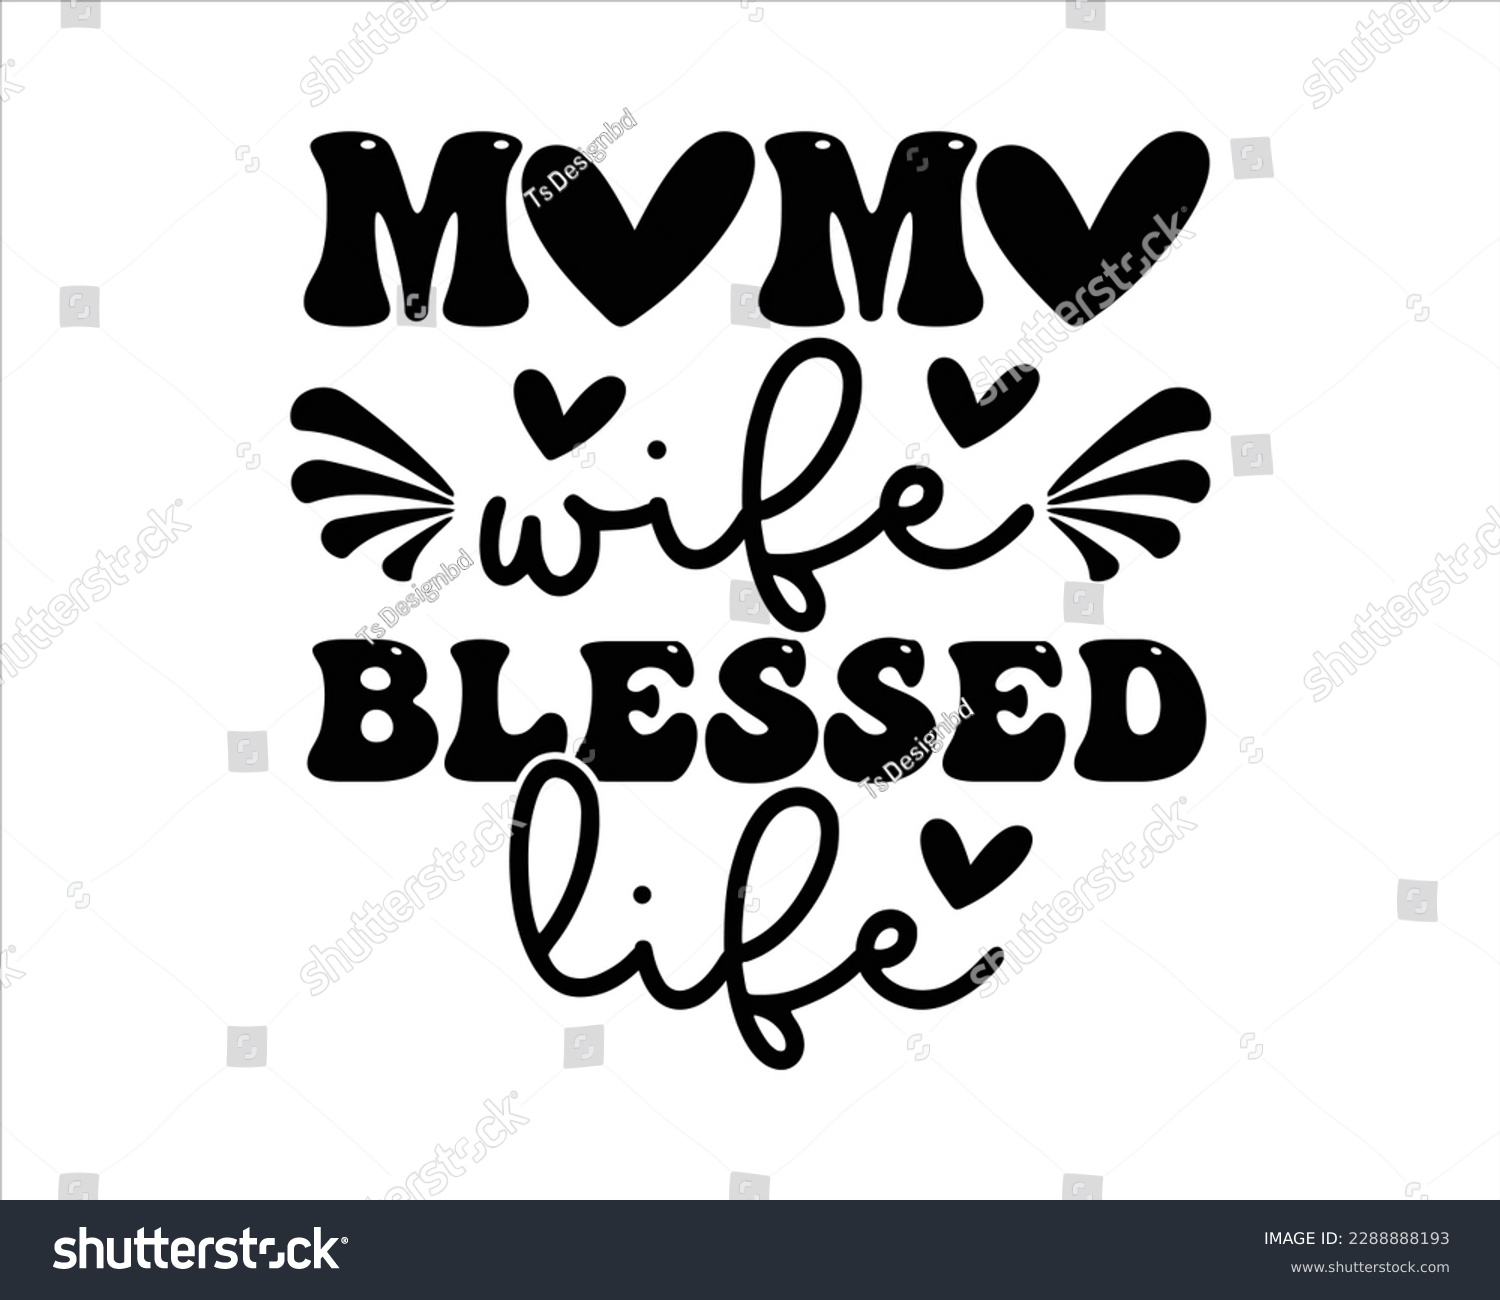 SVG of Mama Wife Blessed Life Retro svg Design,Mom Retro svg design, Mom Life Retro Svg,funny mom svg design,Quotes about Mother, Mom Life Svg,funny mom Retro Design,cut files, svg